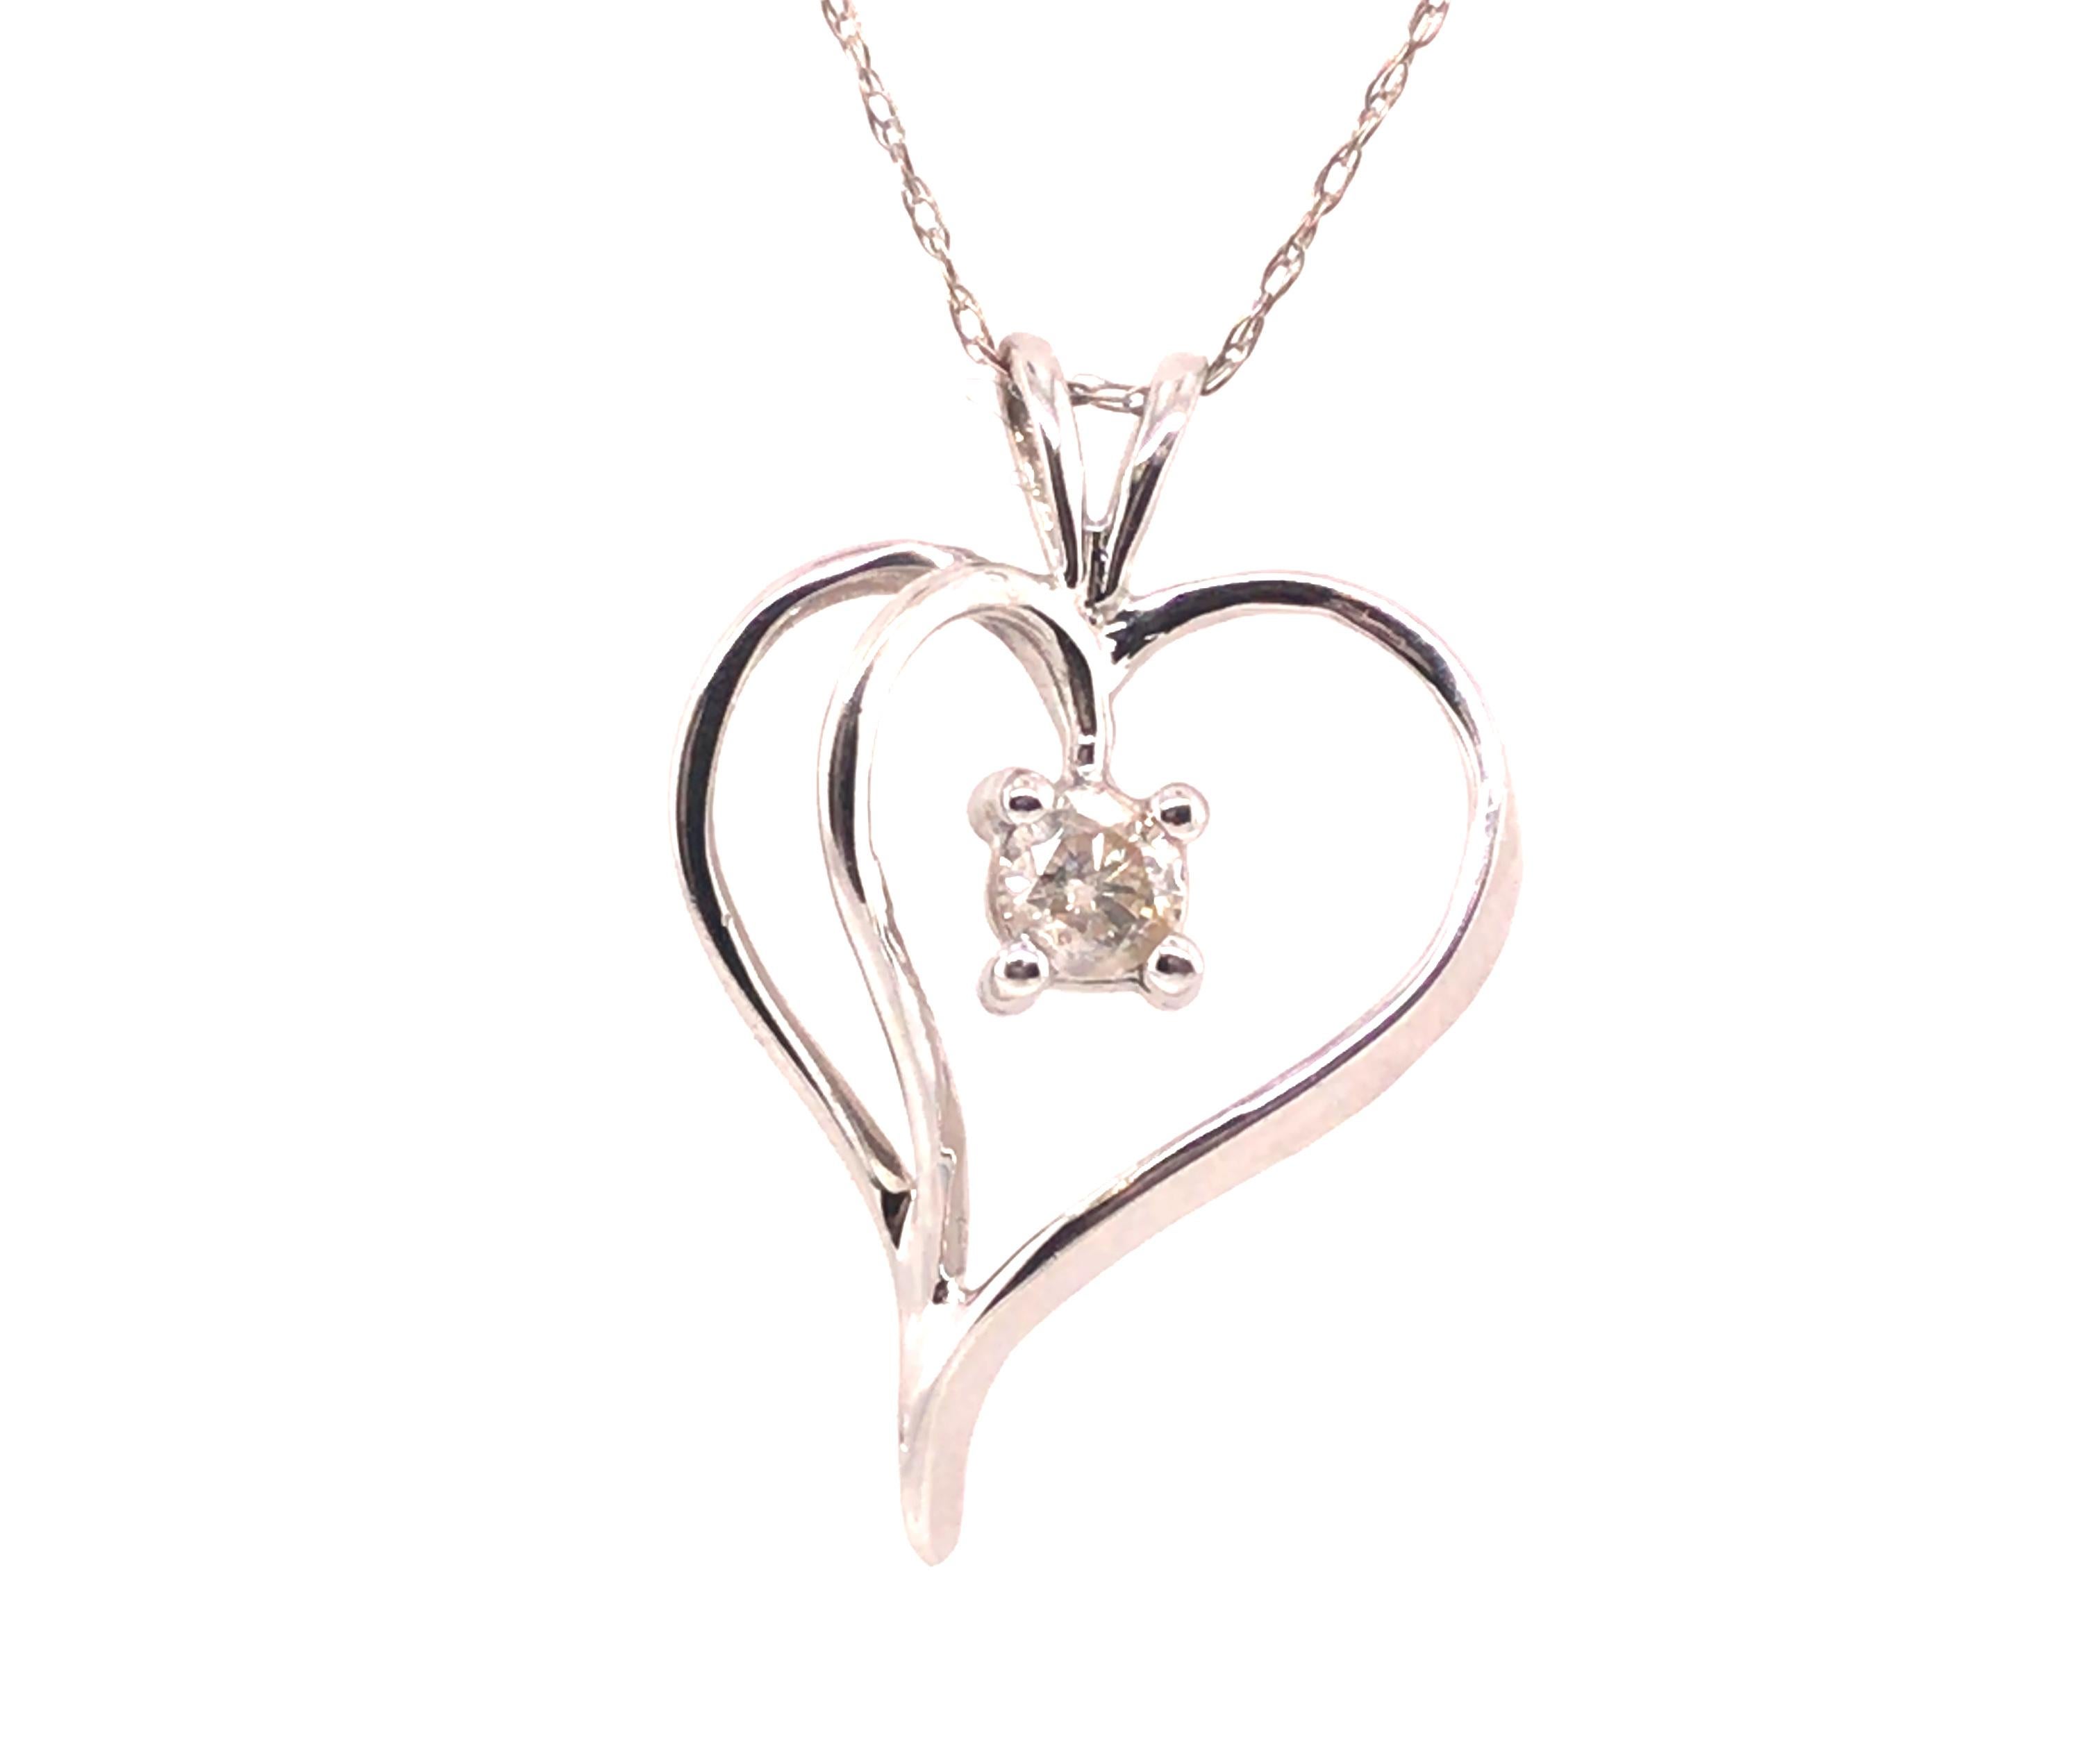 Gorgeous BIG Heart Solitaire Diamond Pendant Necklace .25ct 14K White Gold


Features a Genuine Natural .25ct Round Brilliant Cut Diamond Center

Gorgeous Heart Design

Solid 14K White Gold

100% Natural Diamond

.25 Carats Diamond Weight

Classic